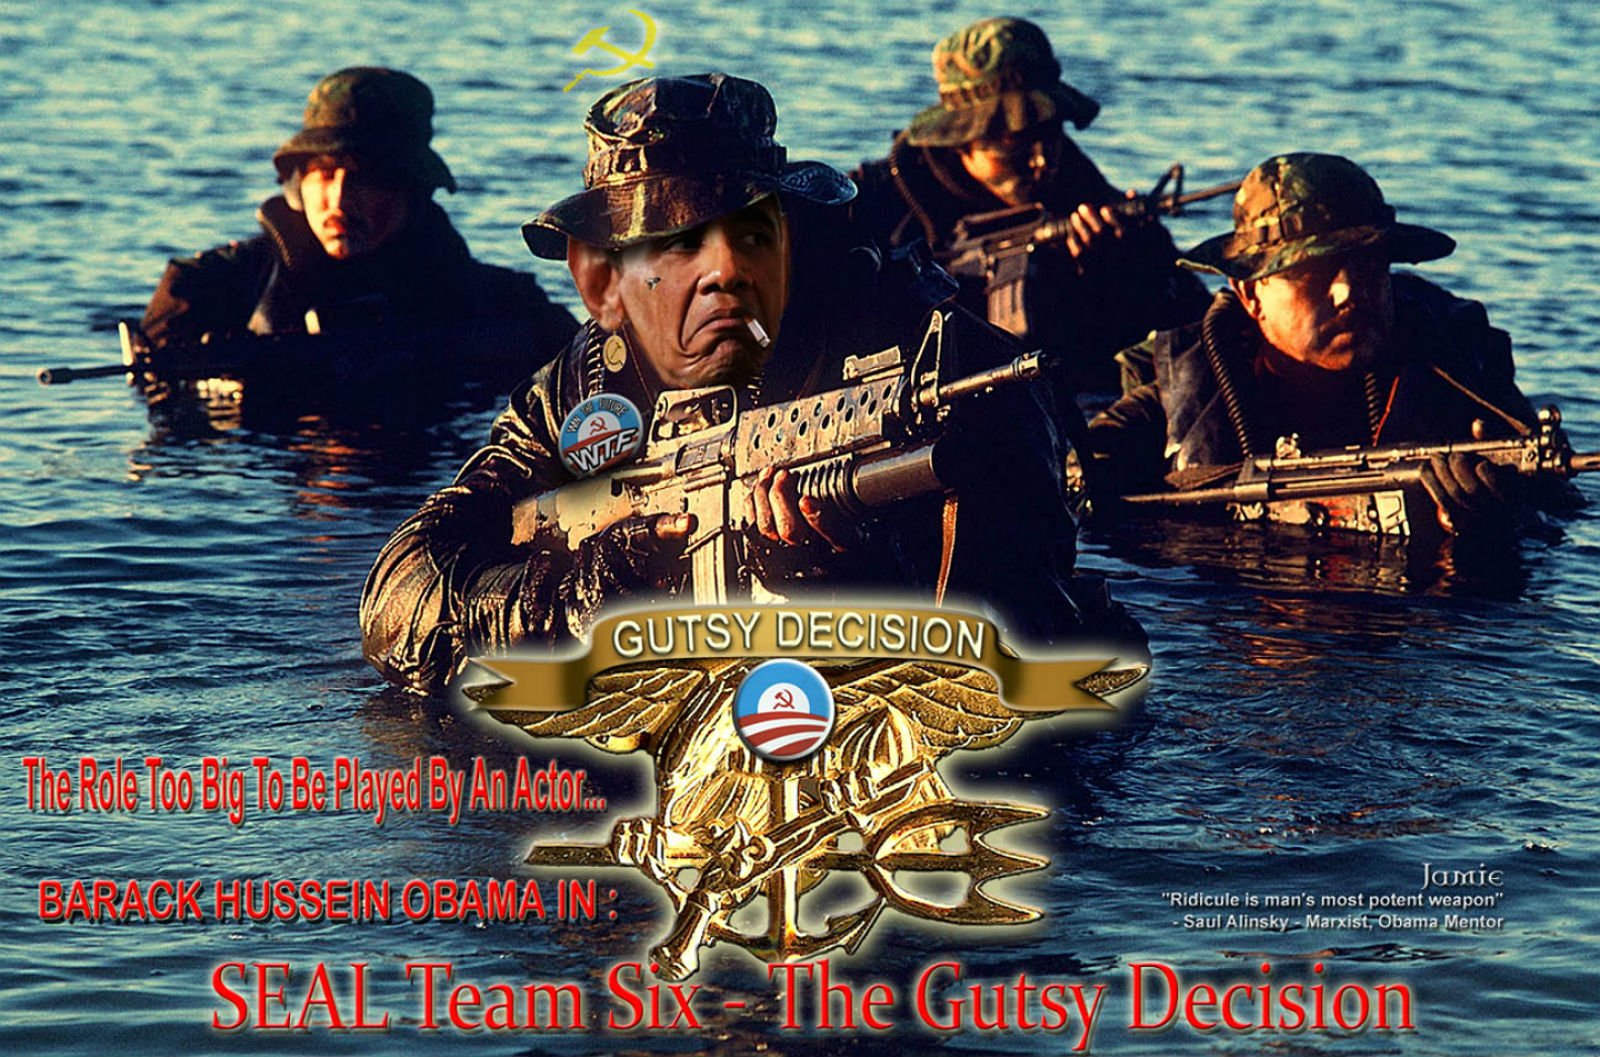 seal, Team, Military, Warrior, Soldier, Action, Fighting, Crime, Drama, Navy, 1stsix, Weapon, Rifle, Assault, Poster, President, Obama, Usa Wallpaper